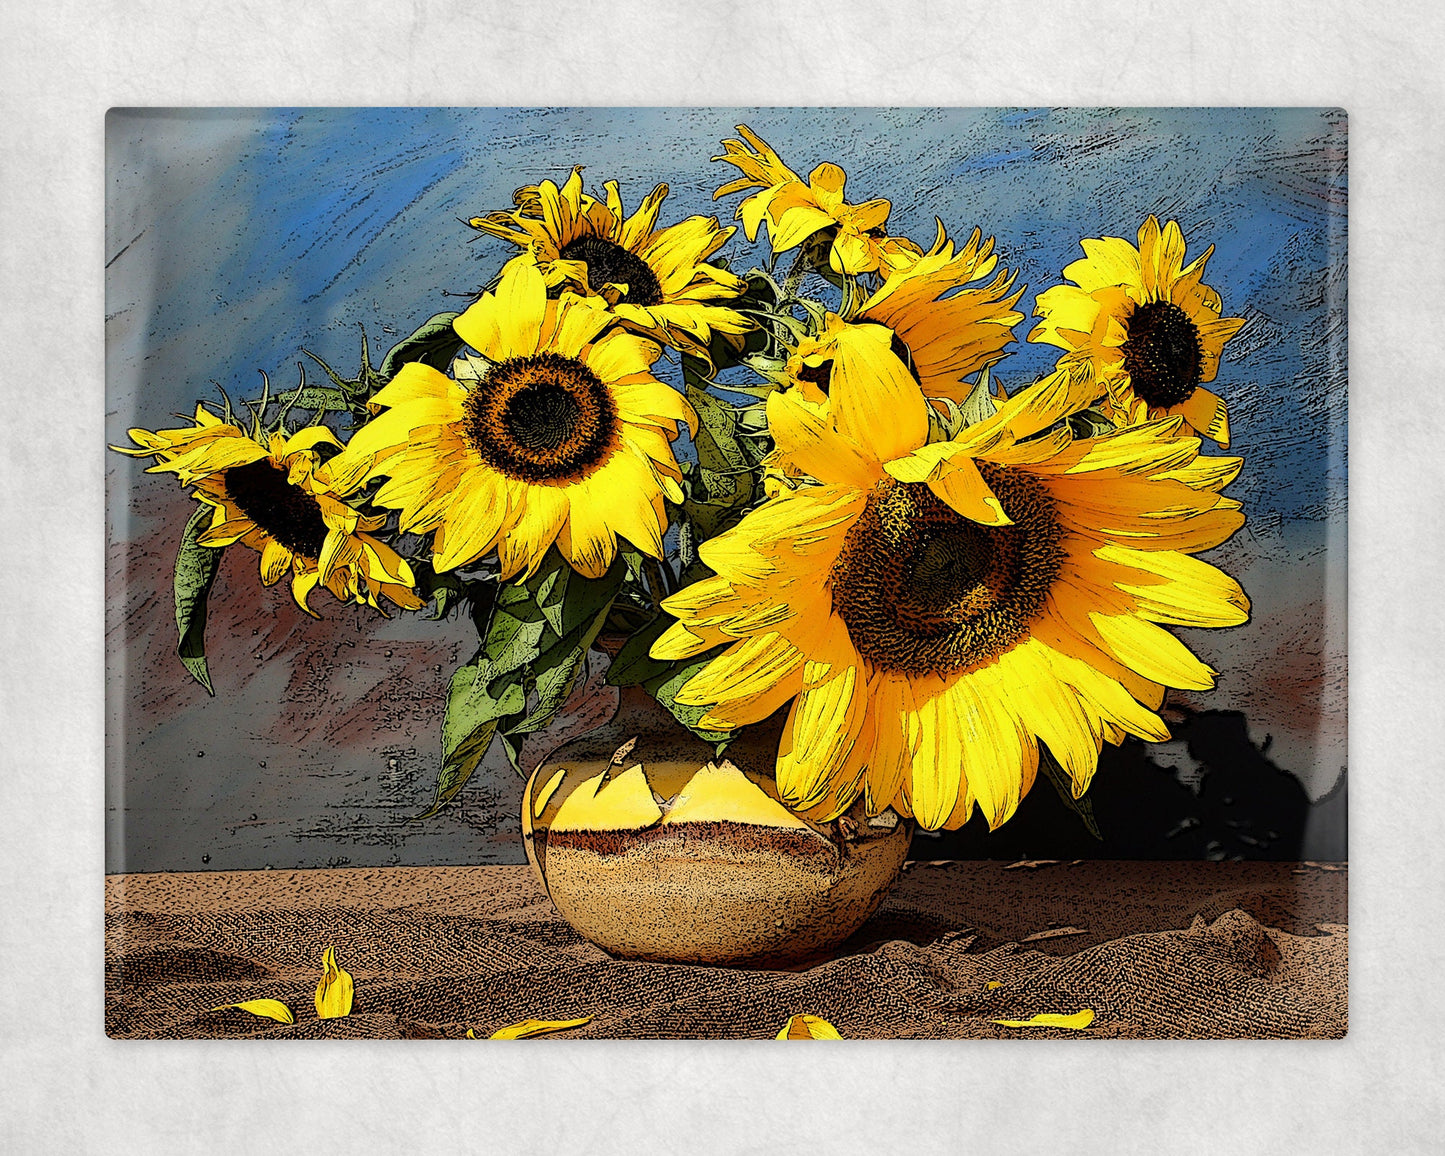 Autumn Sunflowers in Vase Still Life Art Decorative Ceramic Tile with Optional Easel Back - 6x8 inches